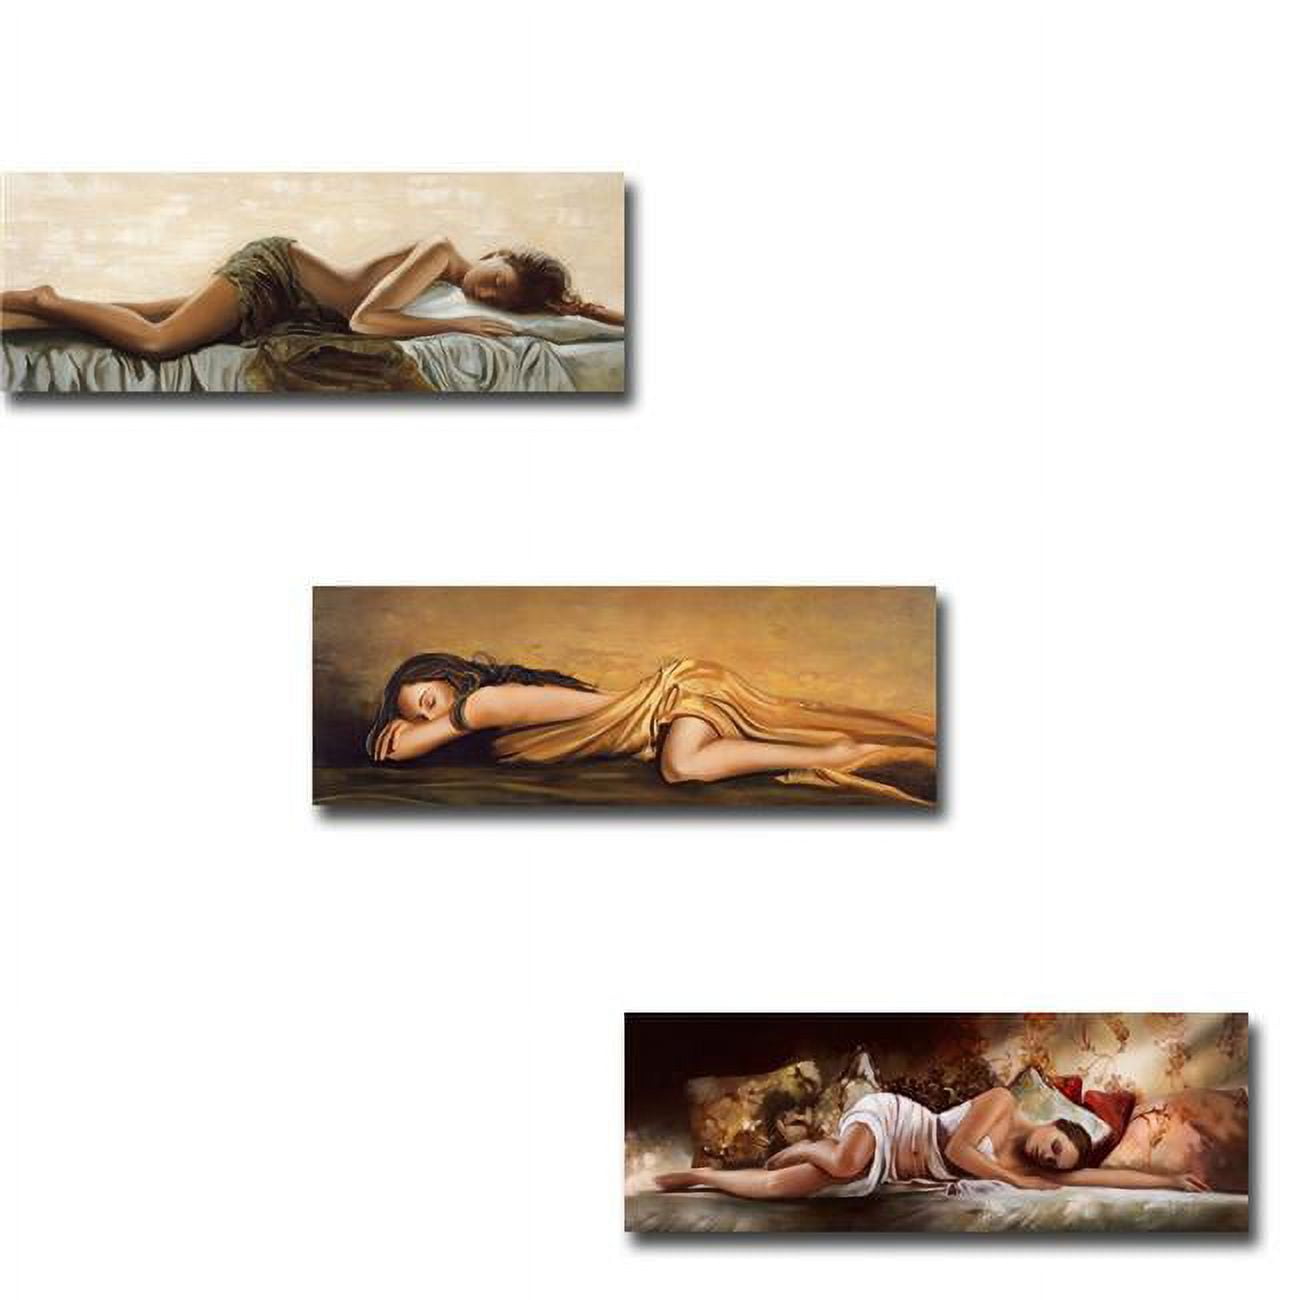 Peaceful, Resting, & Peaceful Slumber By Ron Di Scenza 3 Piece Premium Oversize Gallery-wrapped Canvas Giclee Art Set - 16 X 48 In.